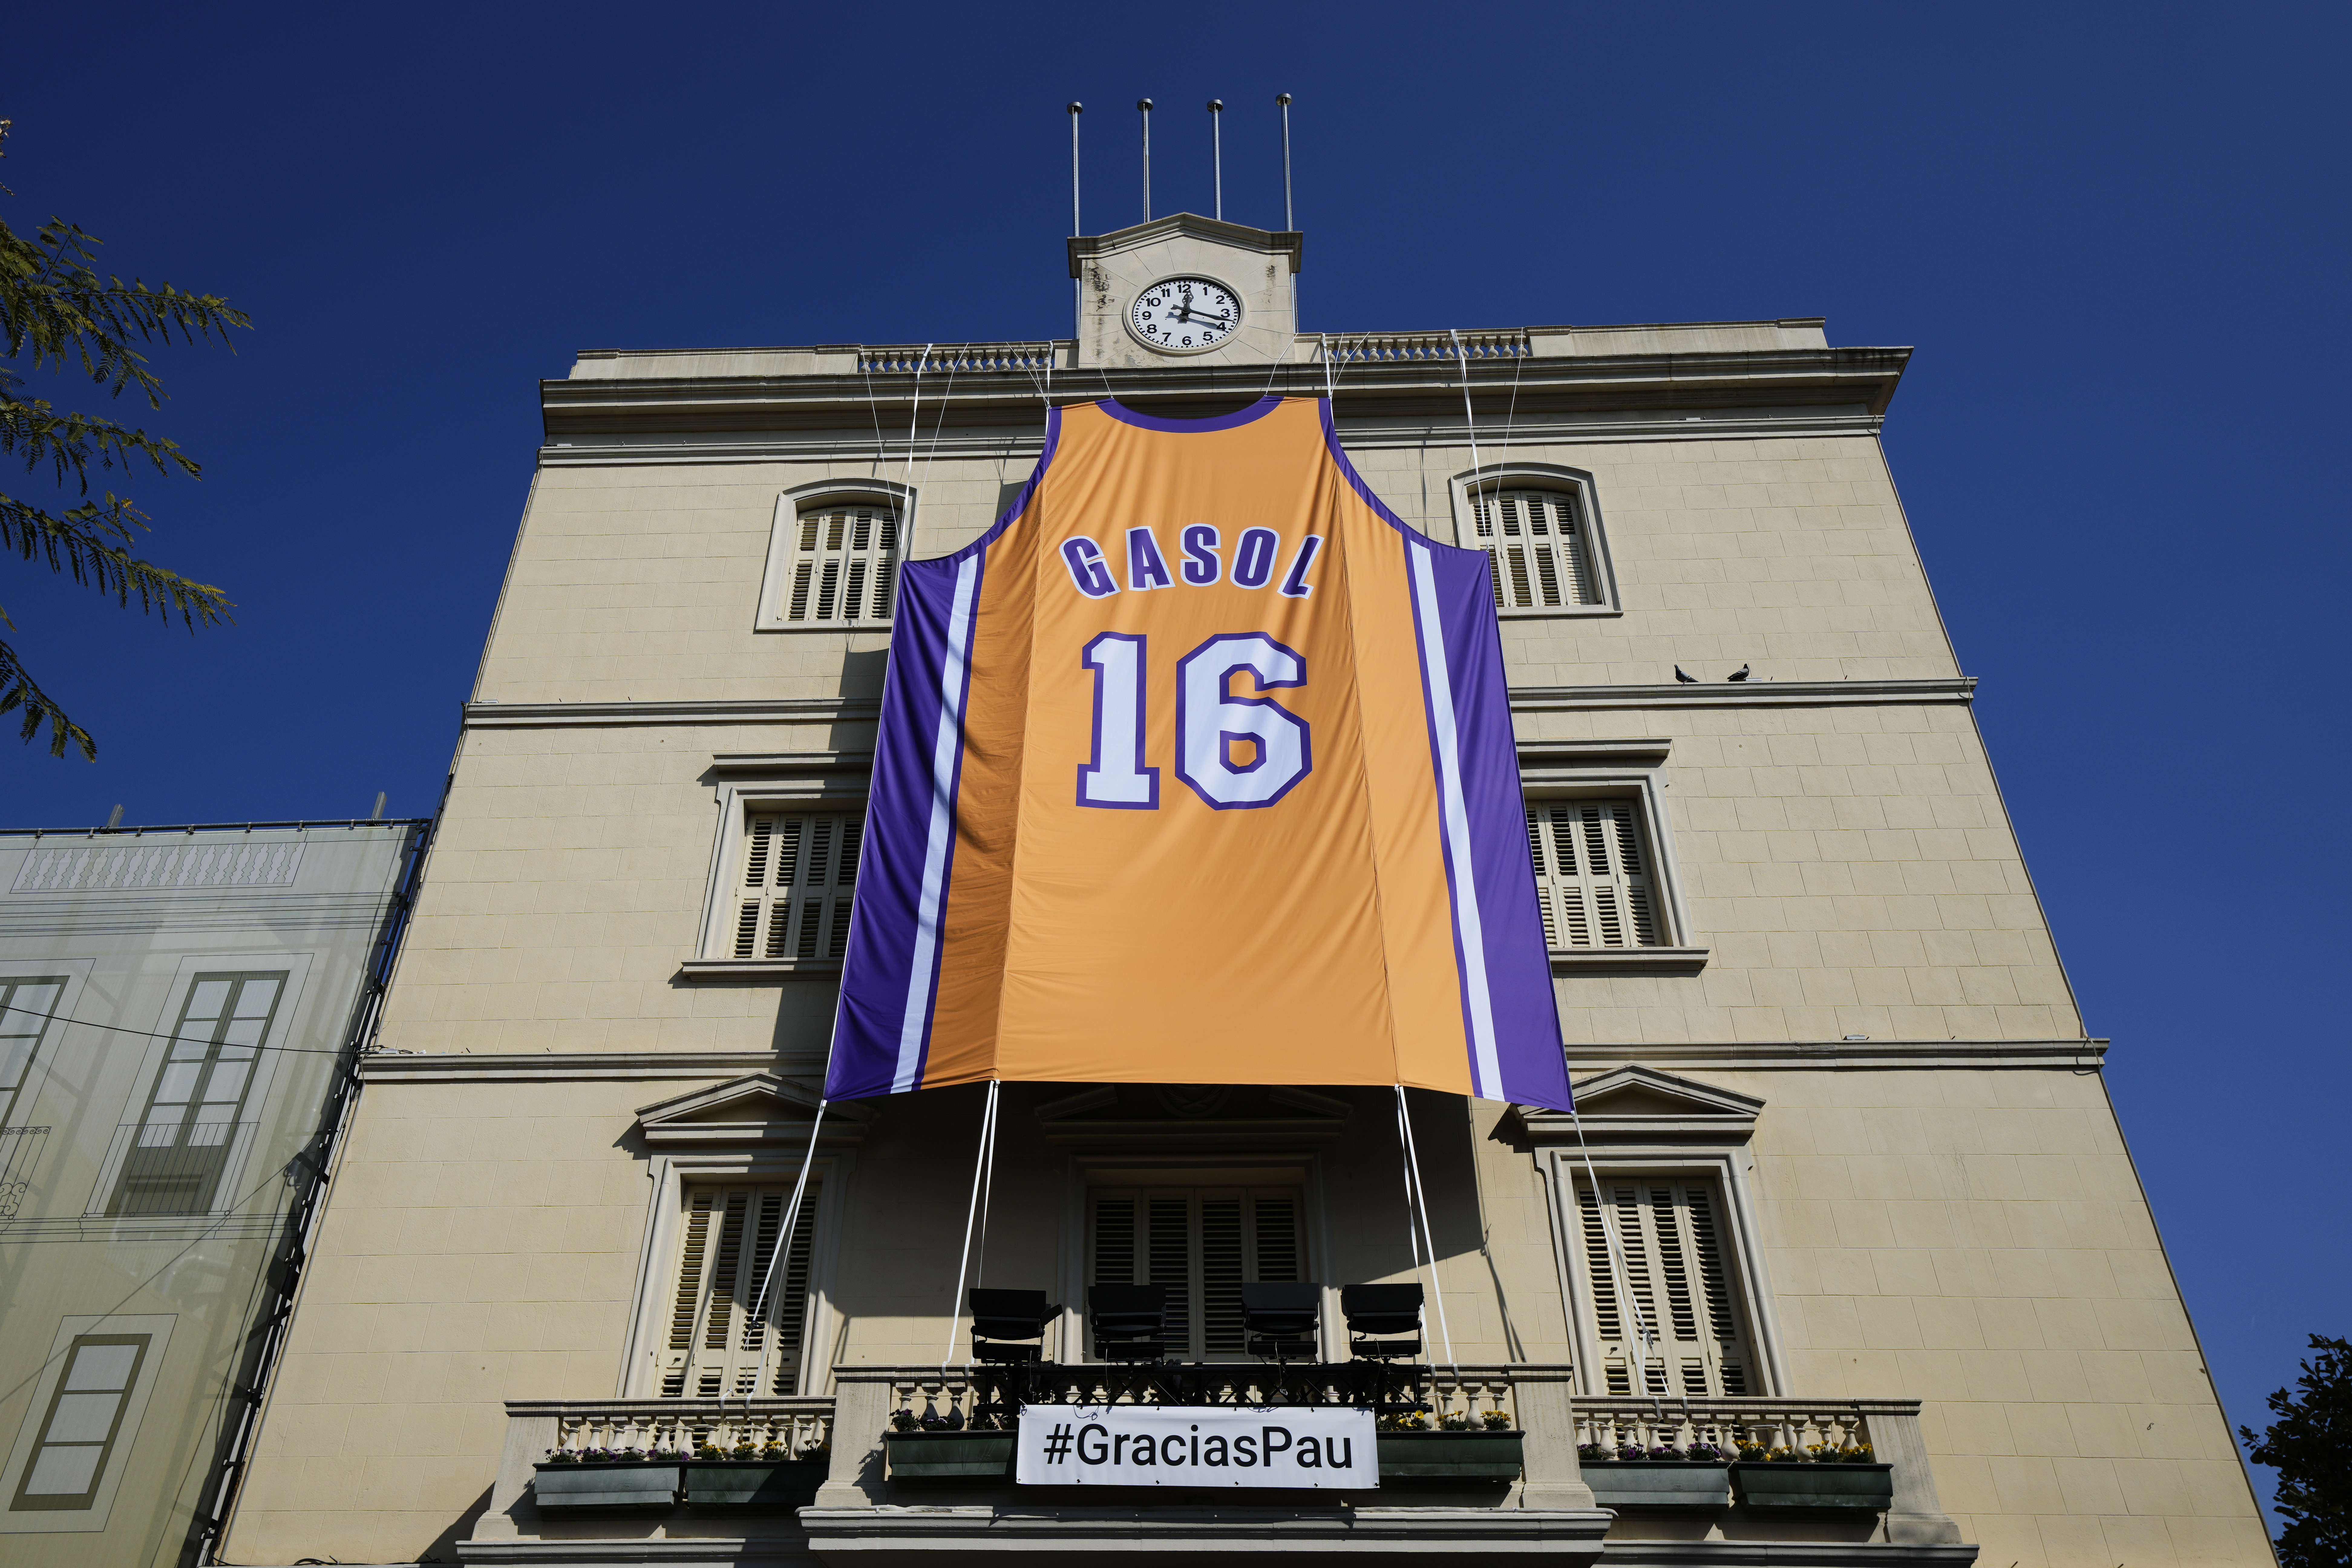 Kareem Abdul-Jabbar on X: It was honor to support @paugasol as